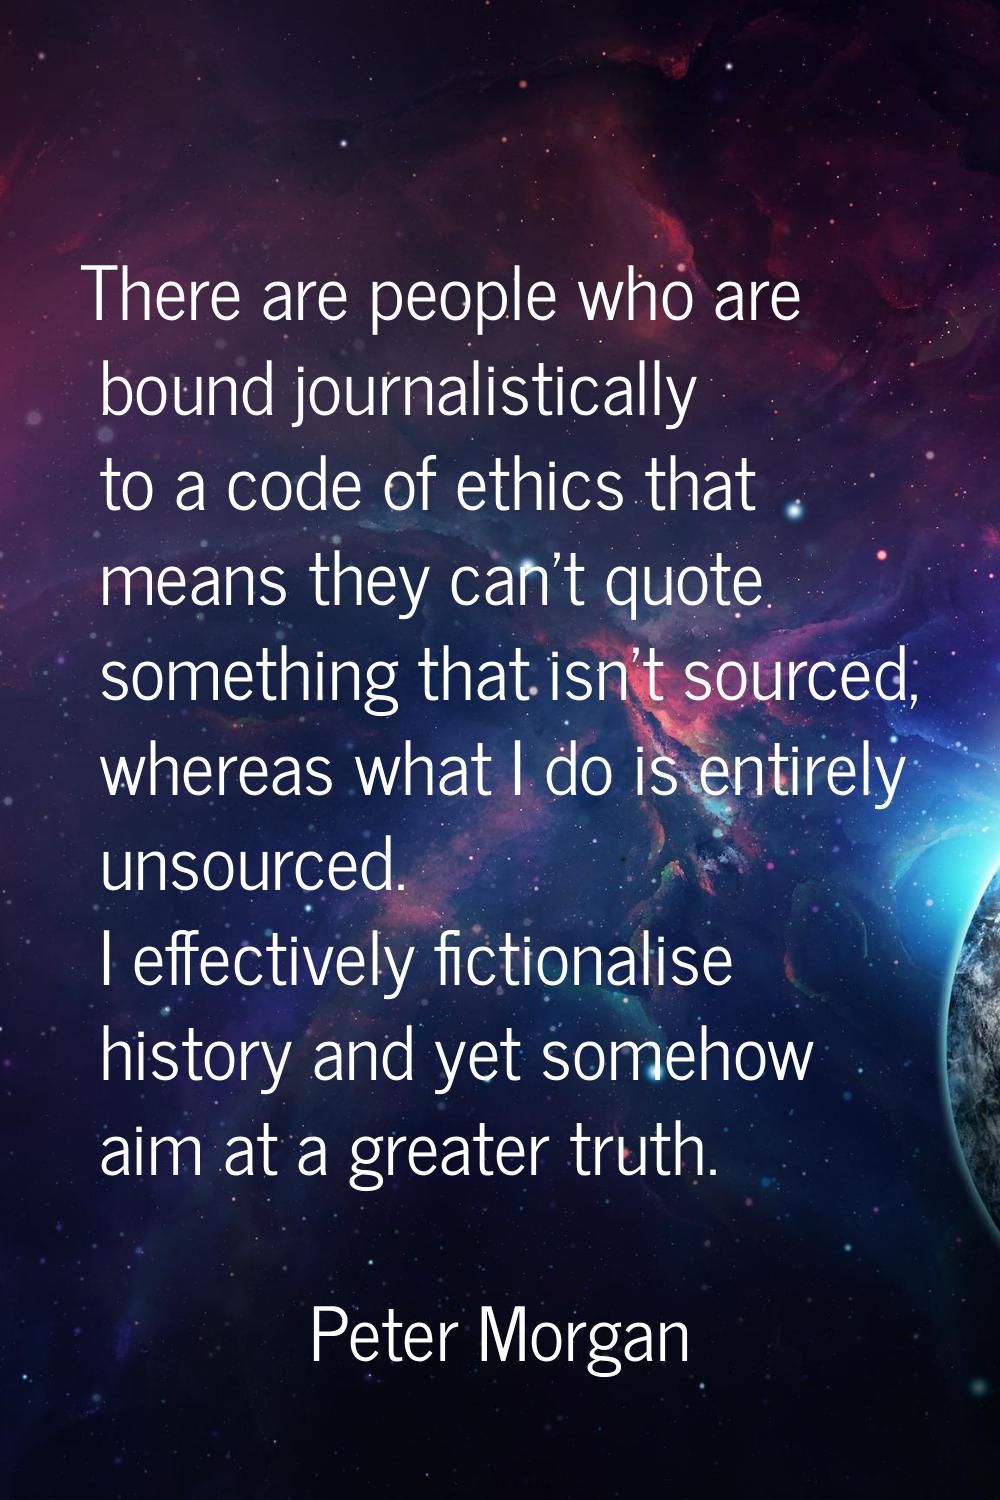 There are people who are bound journalistically to a code of ethics that means they can't quote som